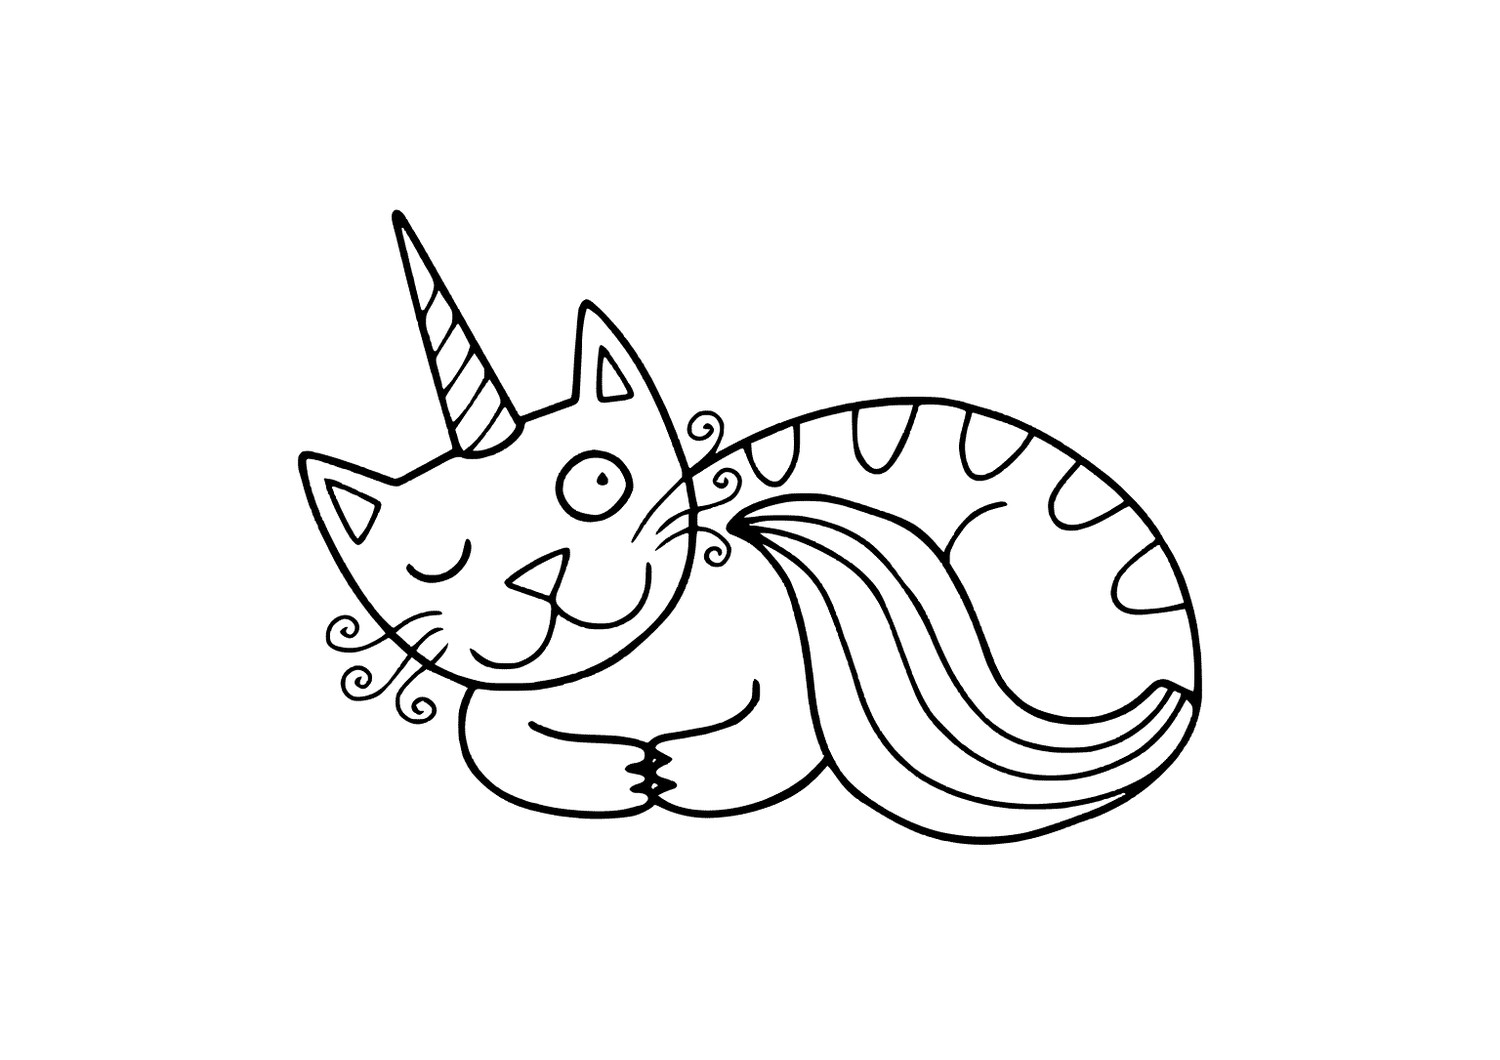 Caticorn Coloring Pages - Coloring Home